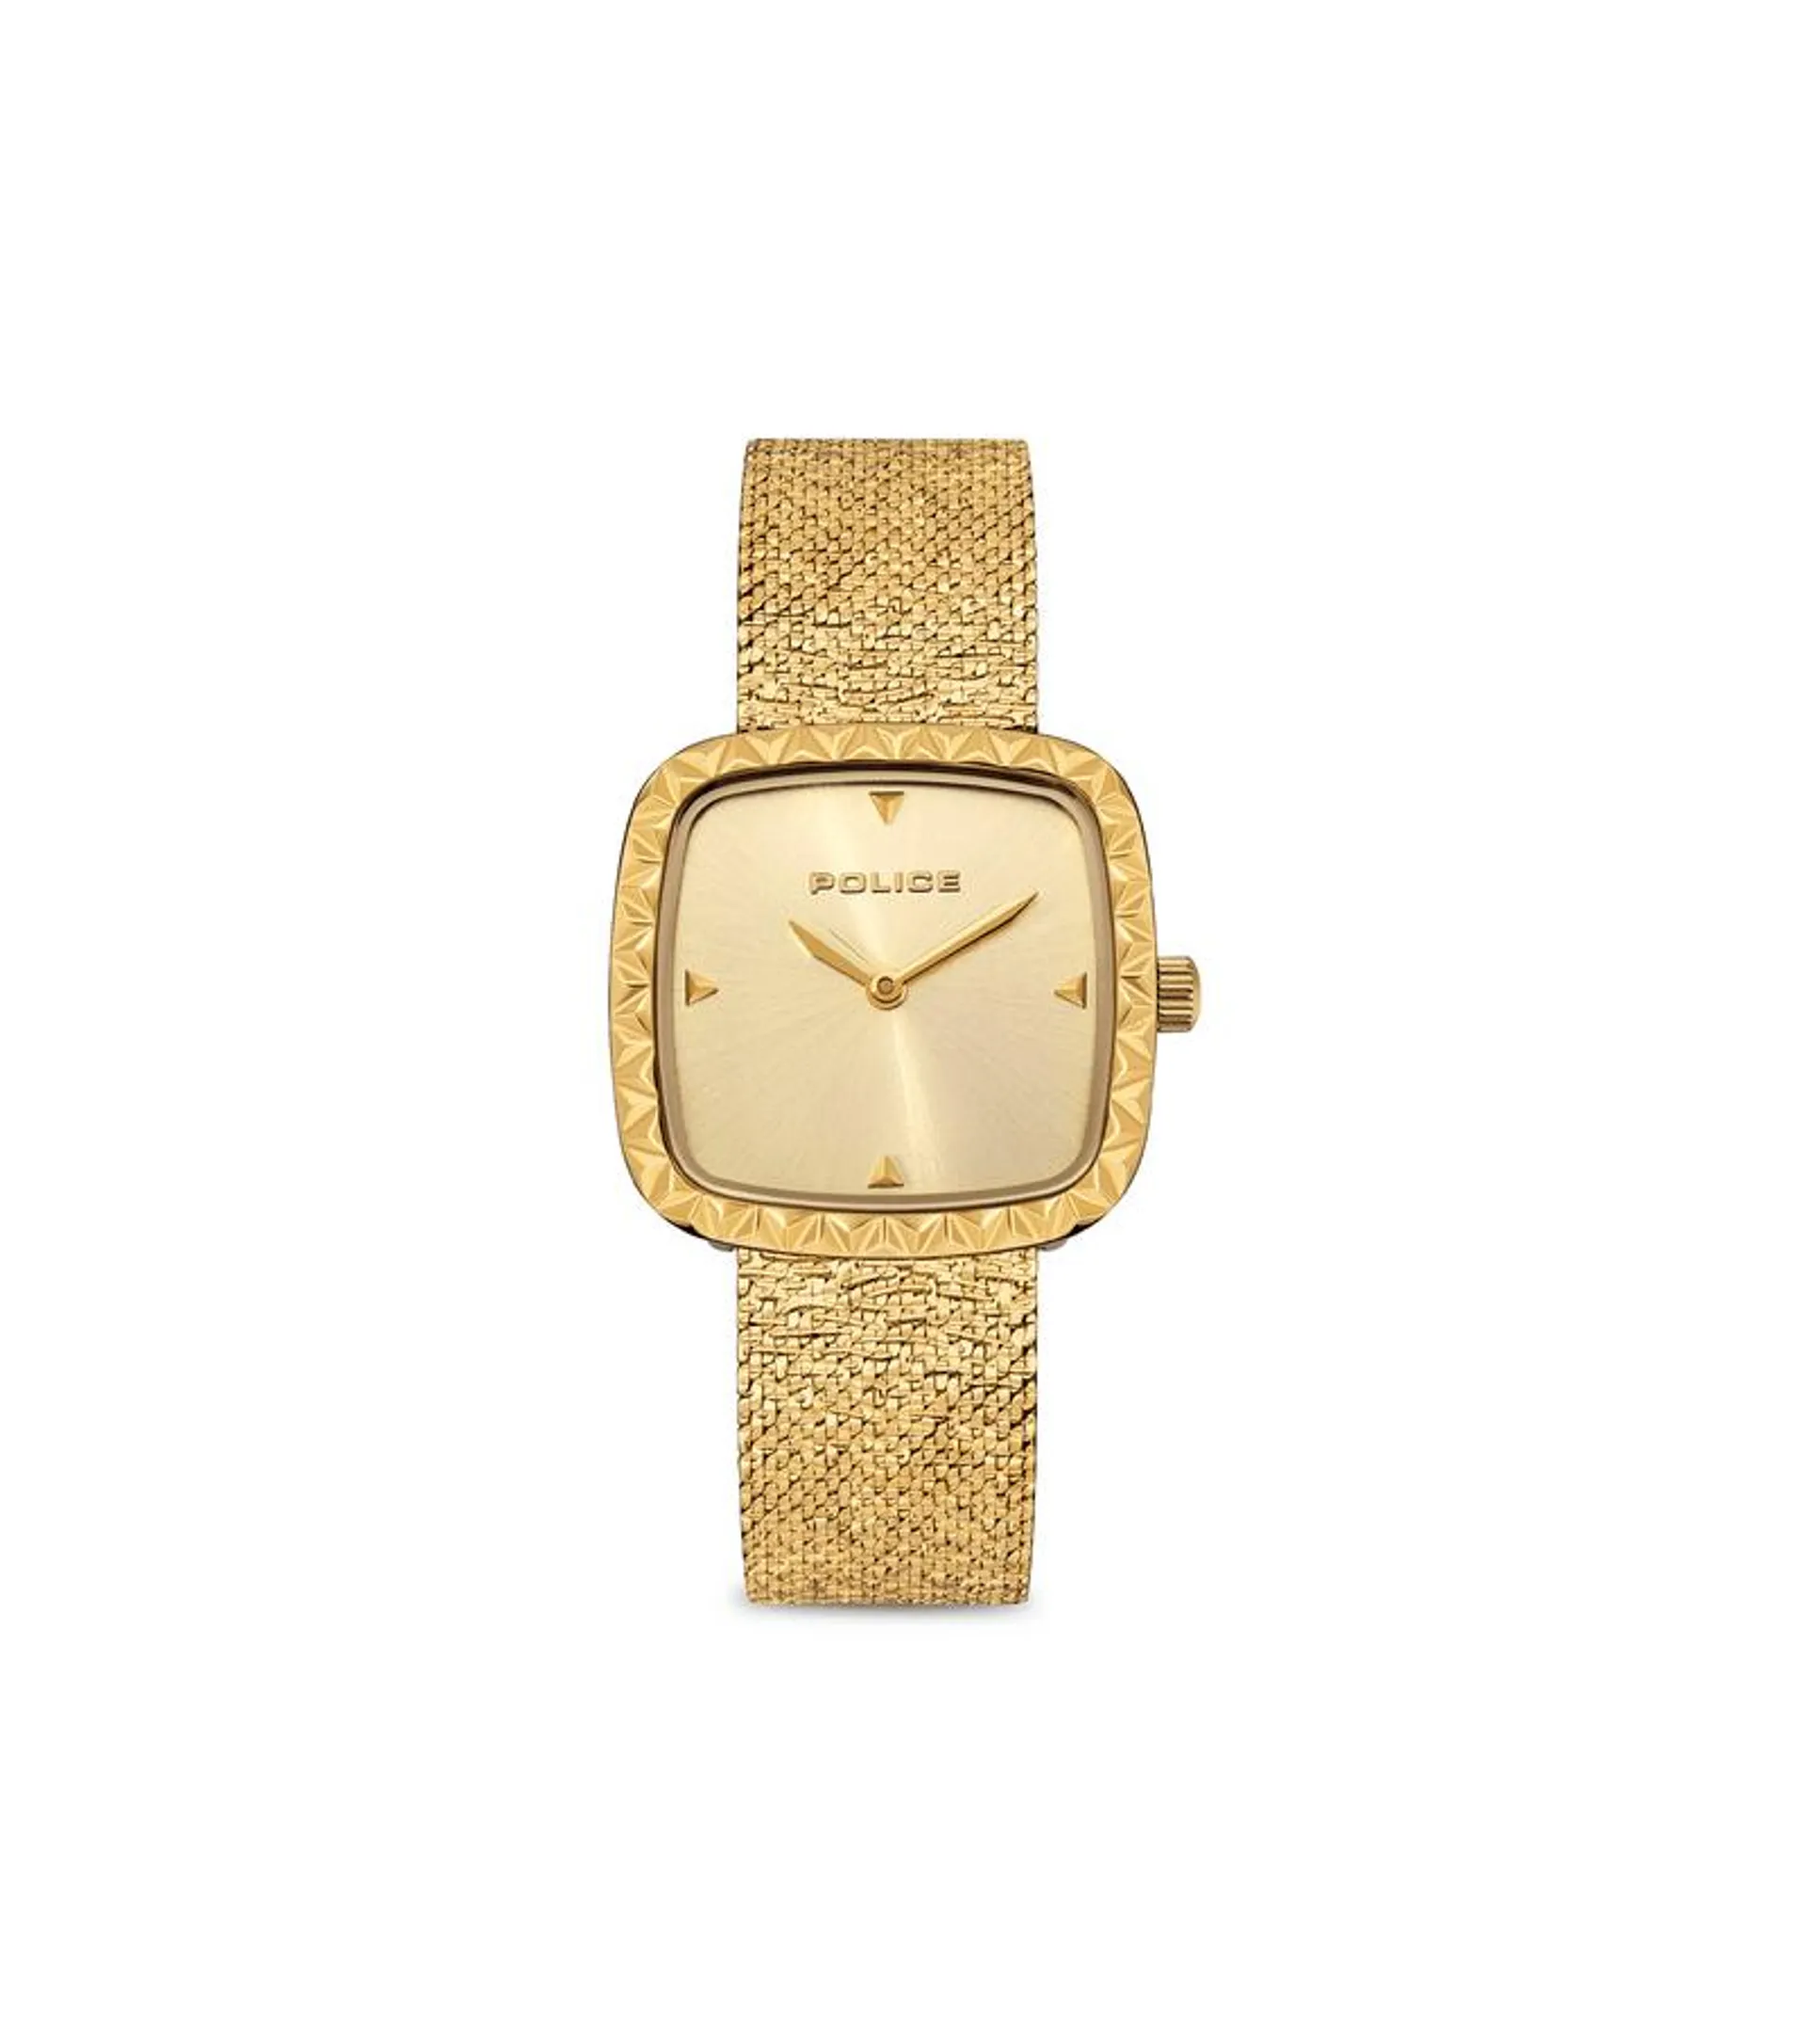 Glamour Square Watch By Police For Women